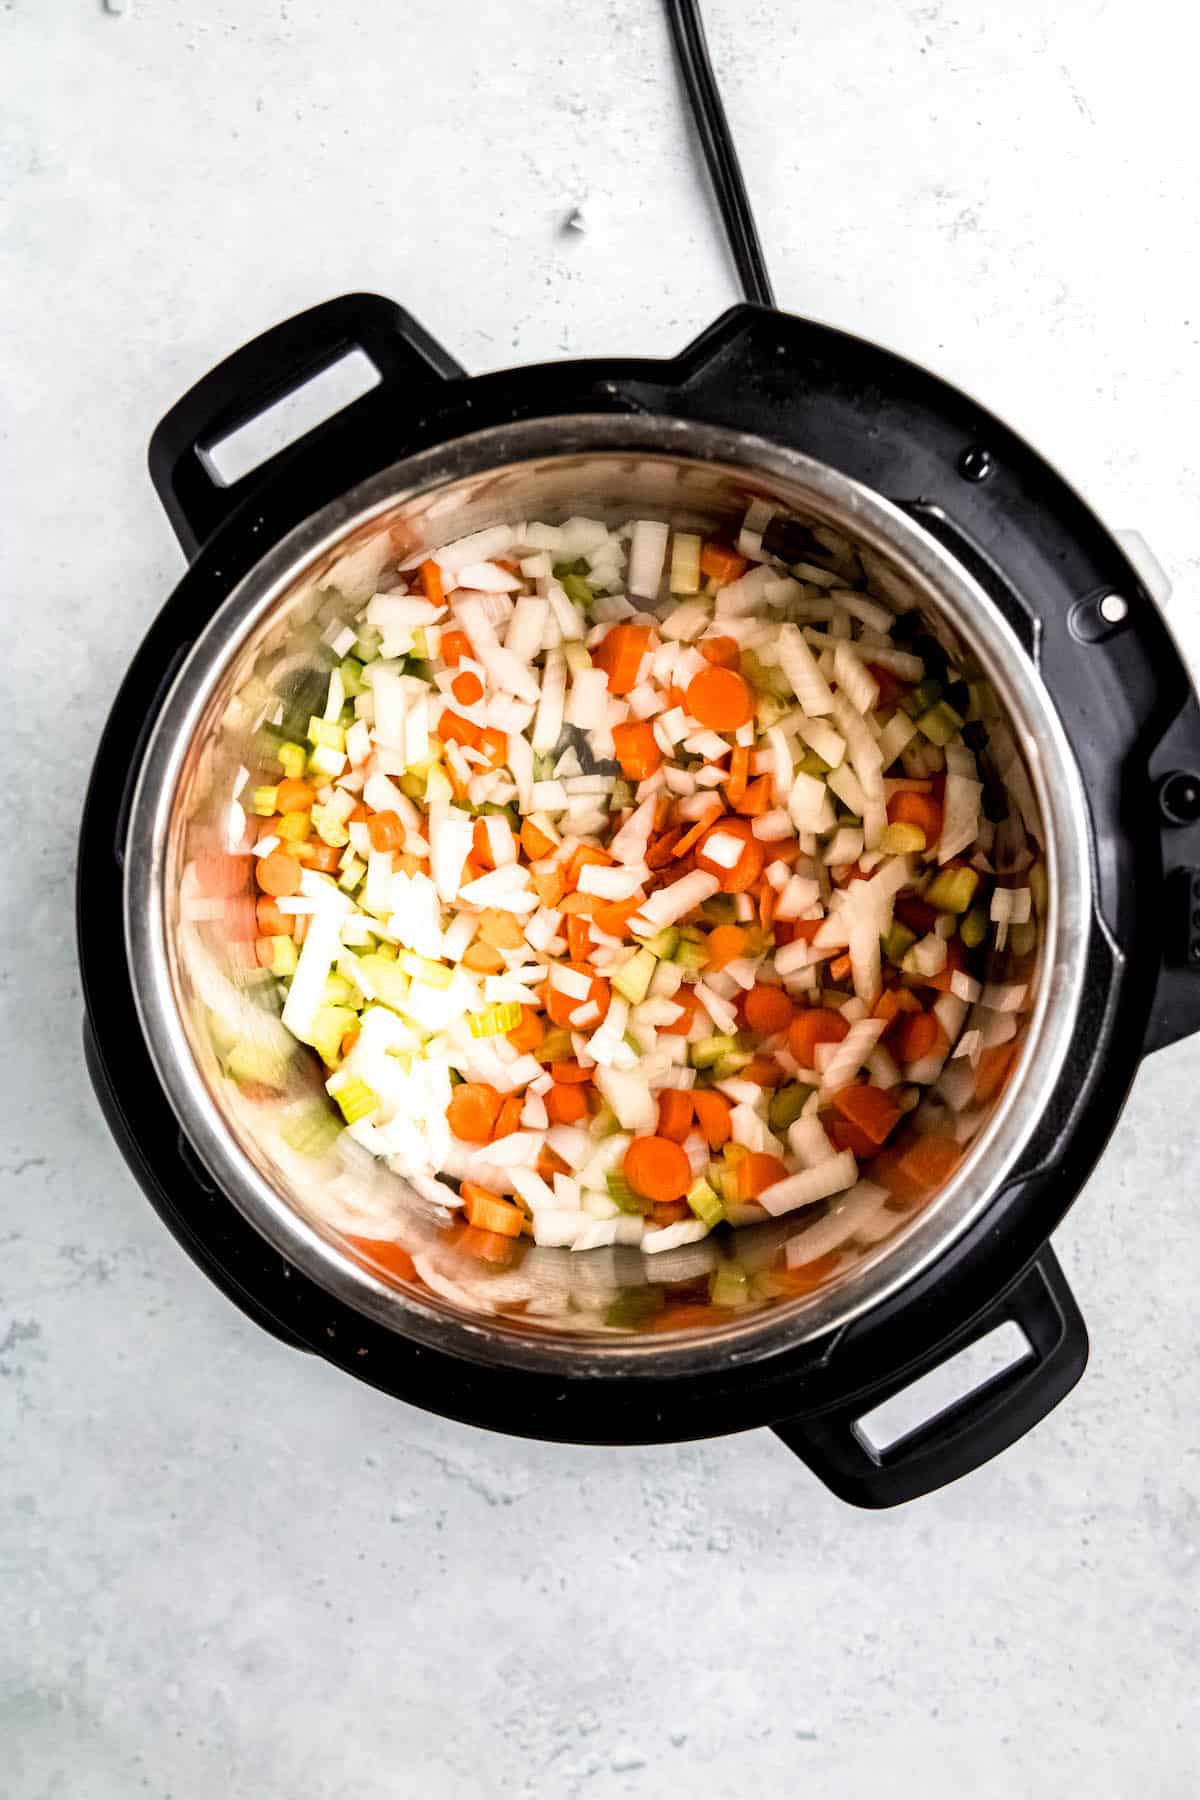 mirepoix being sauteed in the base of the instant pot.